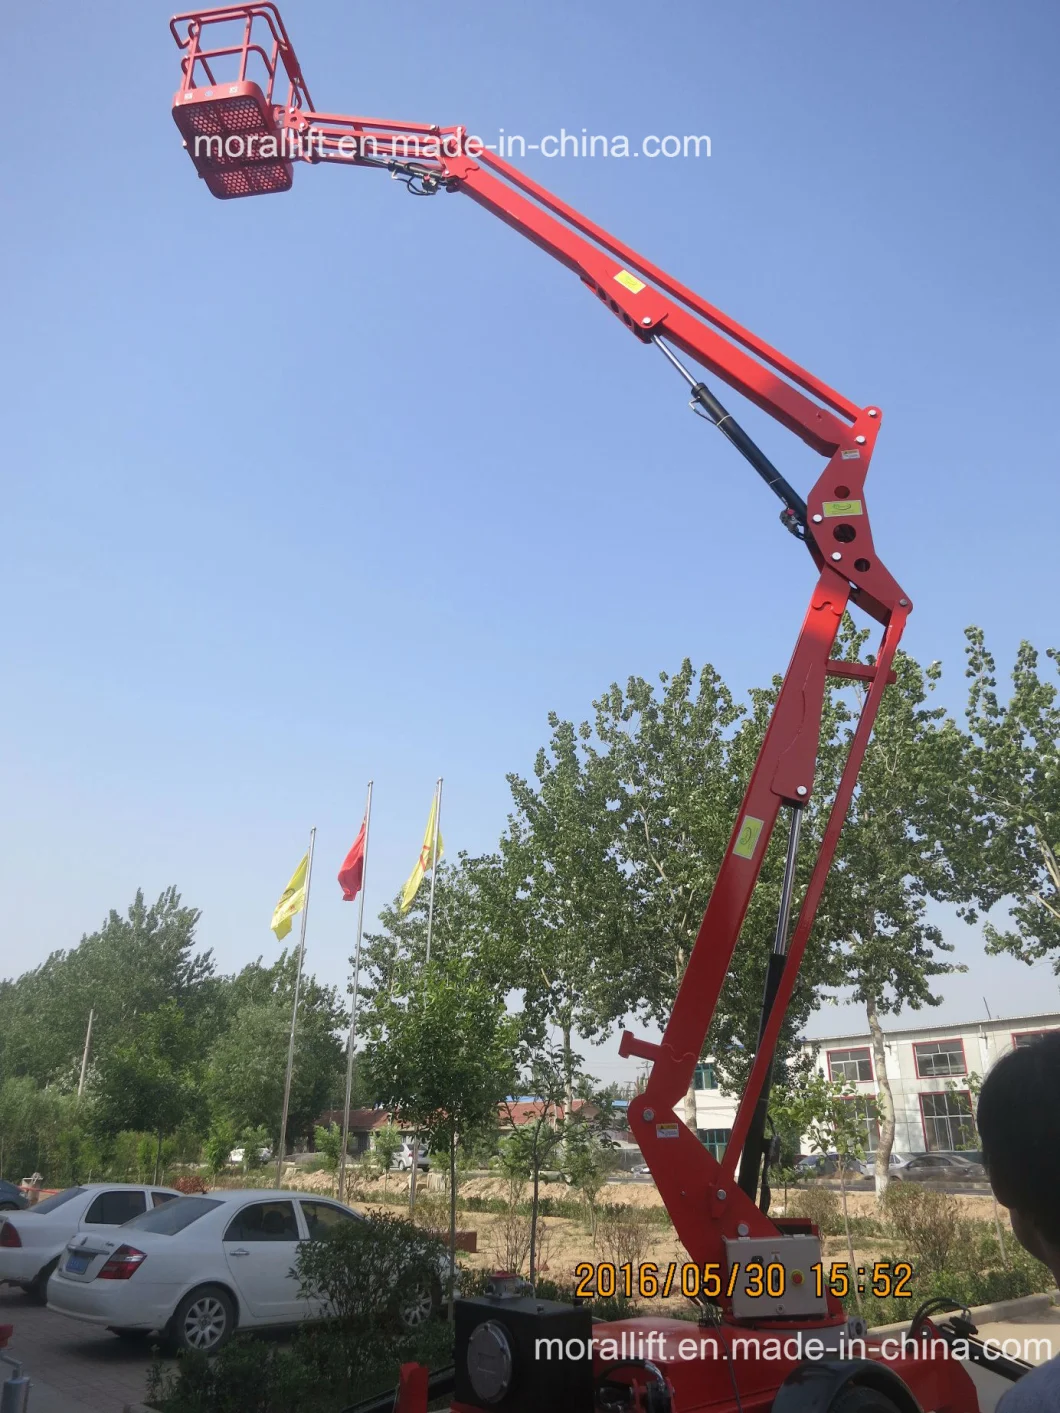 Genie Boom Lift/Hydraulic Trailer Lift with CE Certification